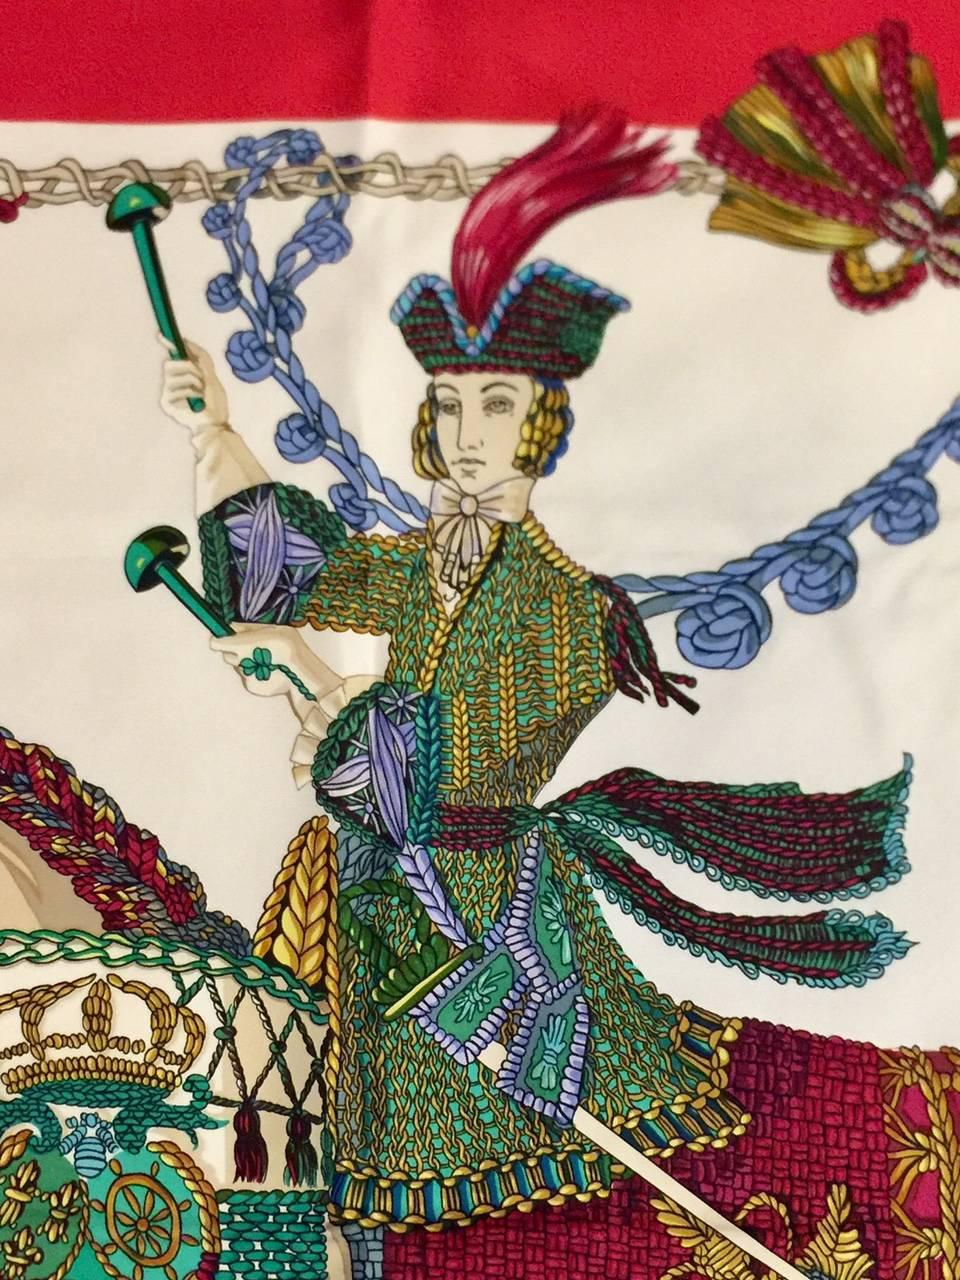 This Vintage Hermes Le Timbalier scarf, despite it's equestrian look, is not dedicated to the Horseman but to his trade.  Le Timbalier is defined as a performer (Timpanist) who plays 2 or more kettledrums, as noted on this outstanding Hermes